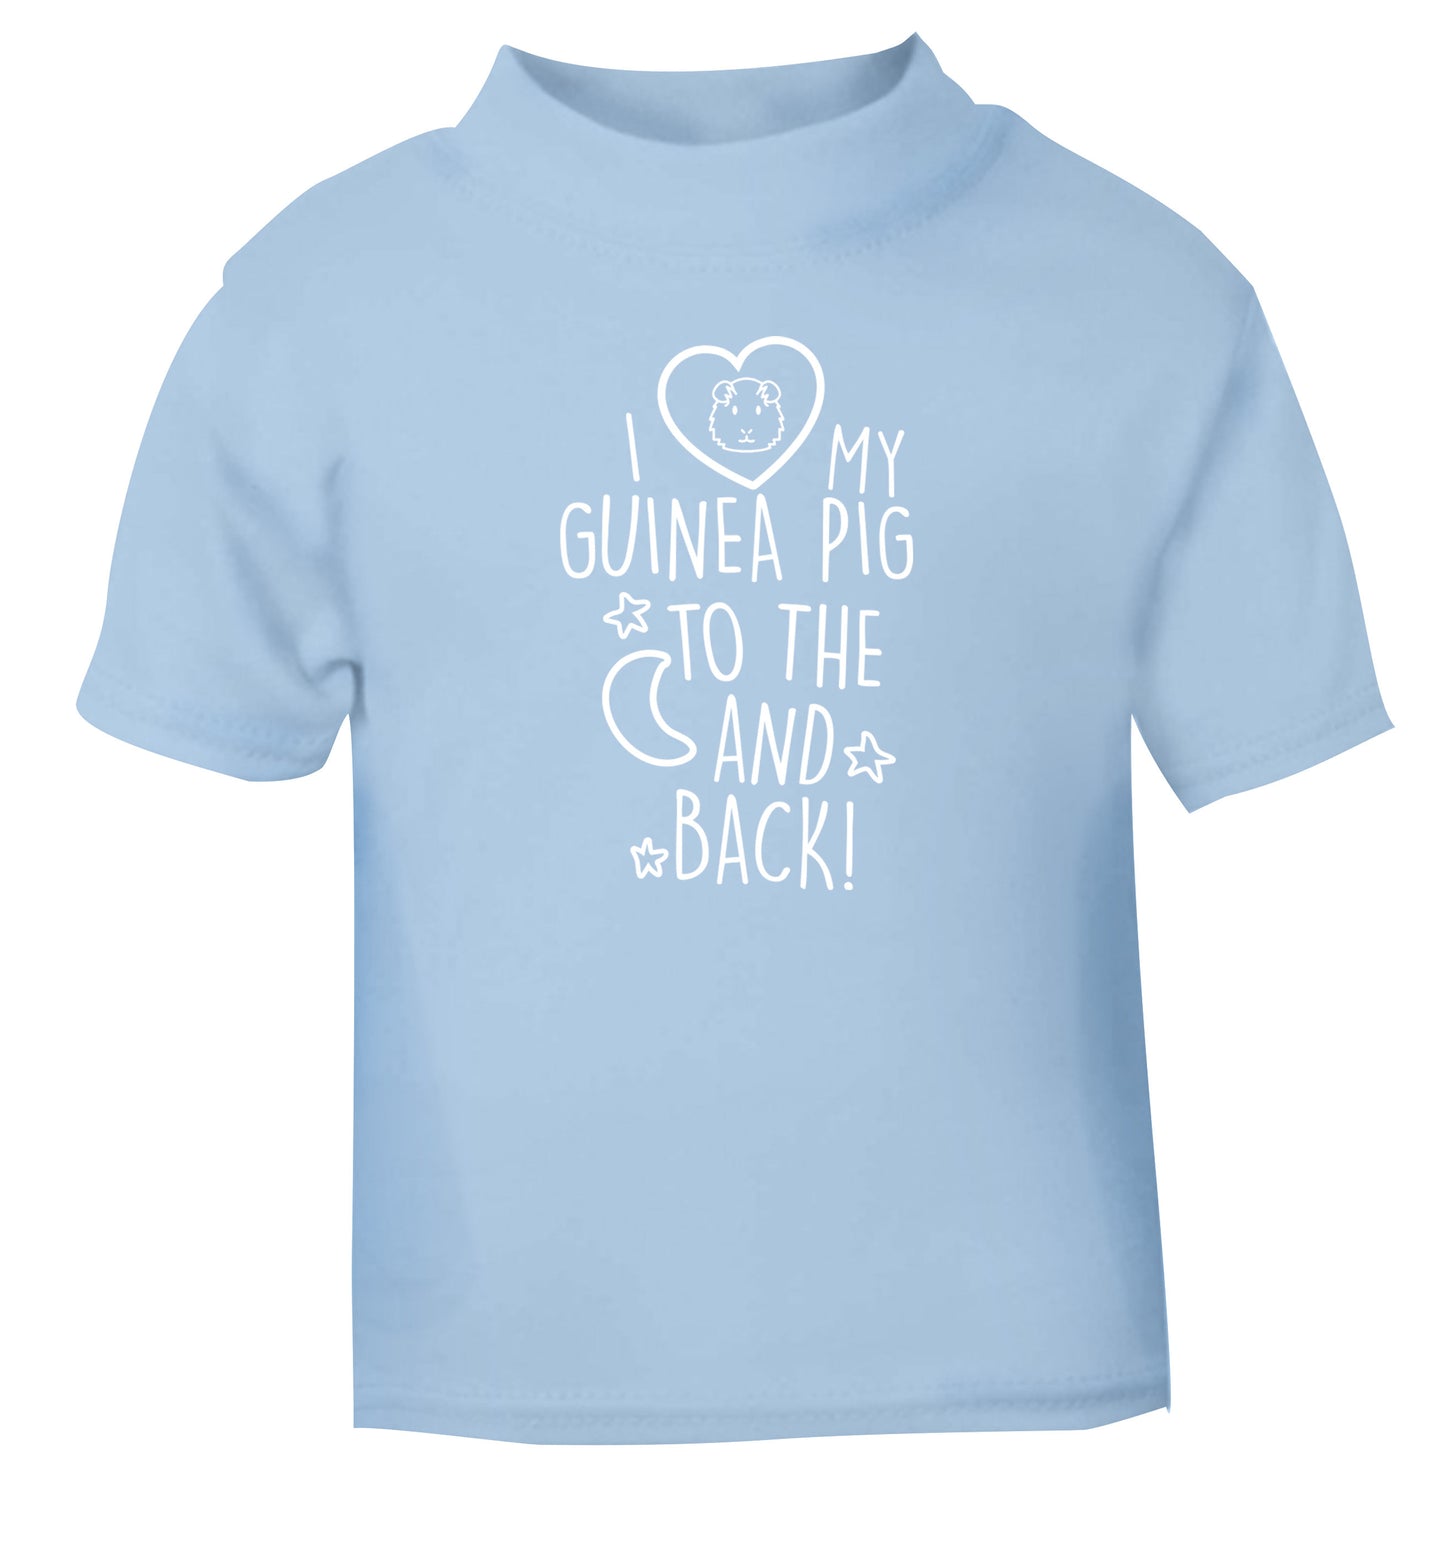 I love my guinea pig to the moon and back light blue Baby Toddler Tshirt 2 Years